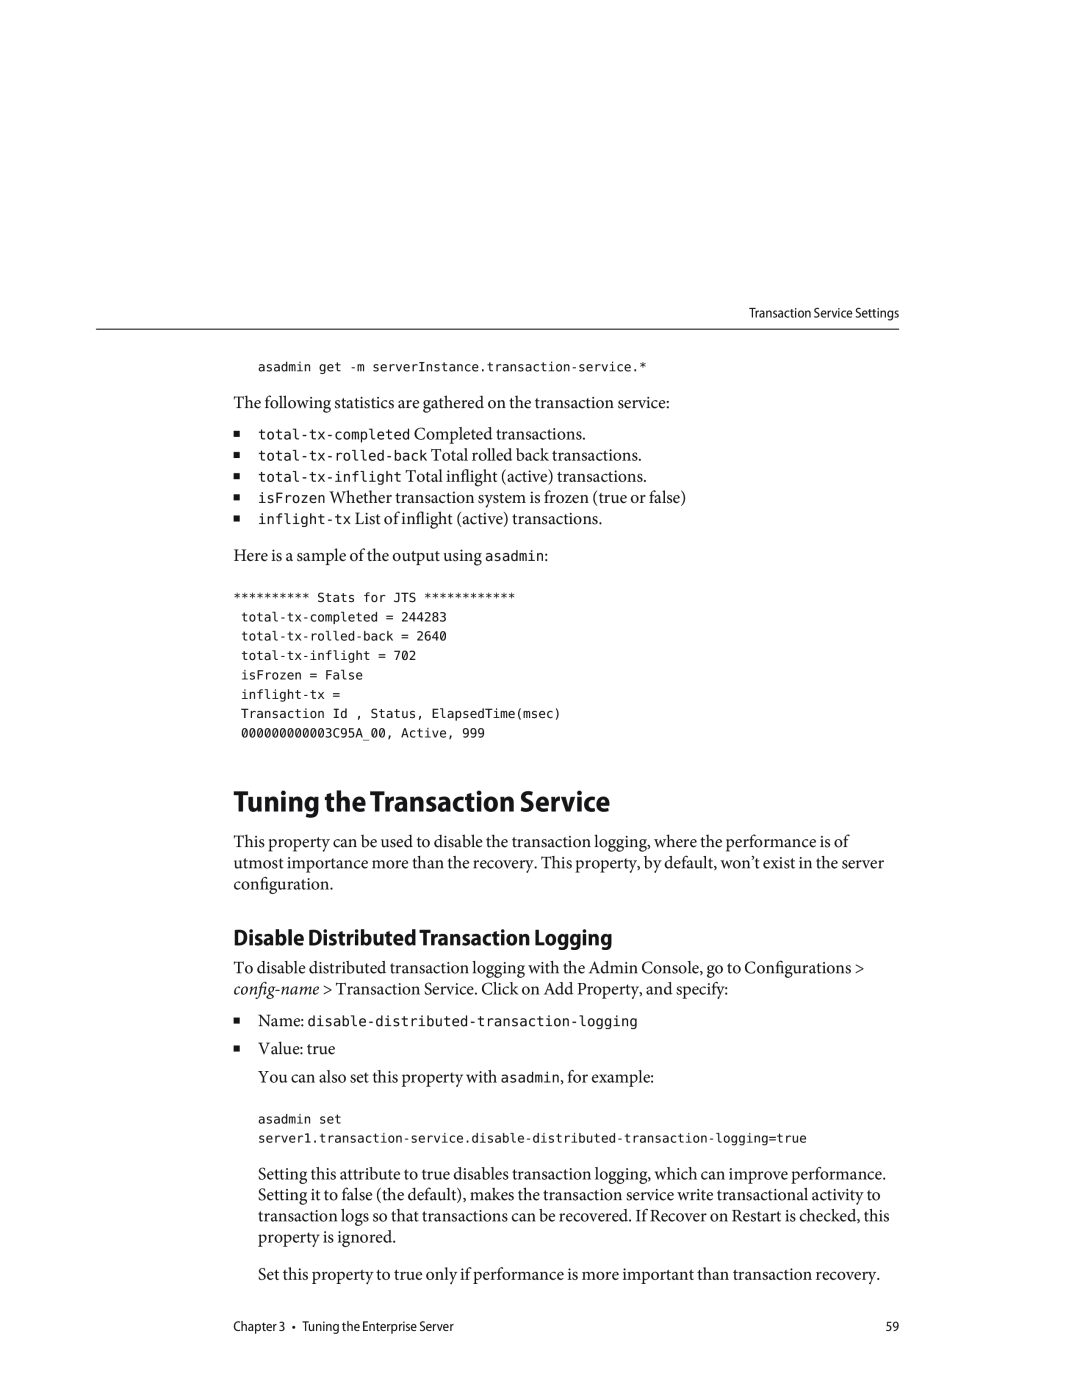 Sun Microsystems 820434310 manual Tuning the Transaction Service, Disable Distributed Transaction Logging 